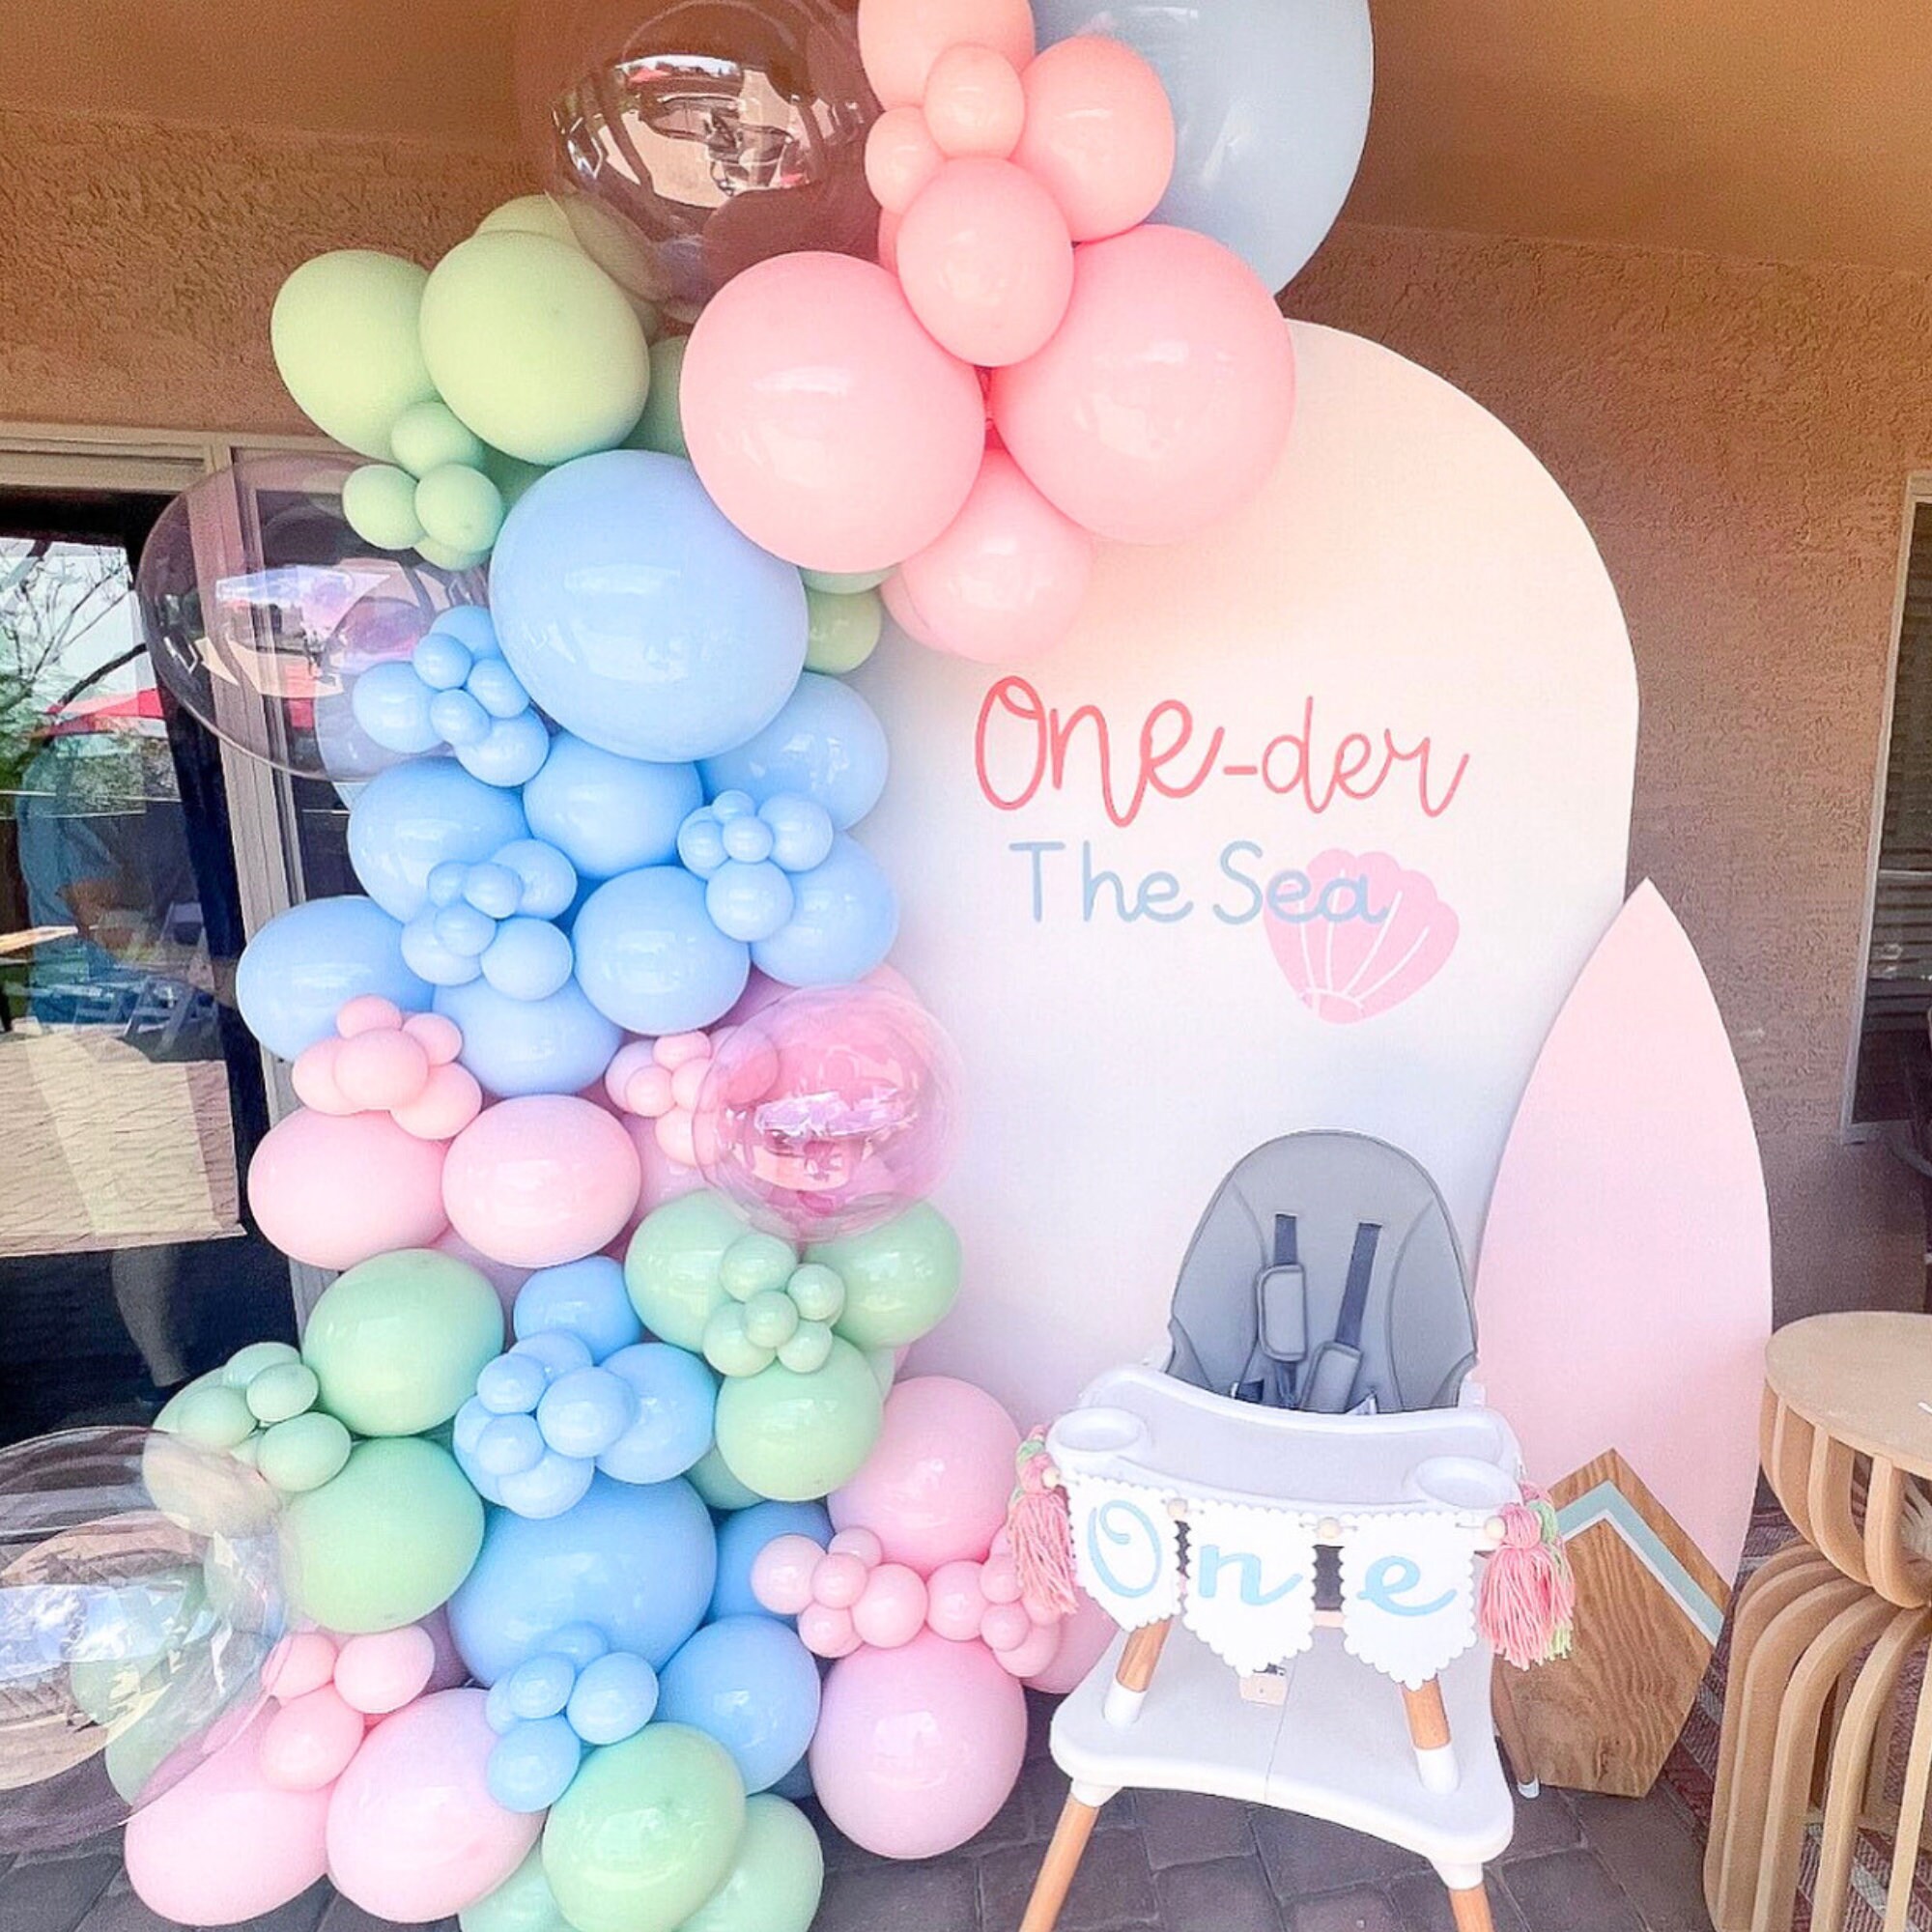 DIY Balloon Kit L Oneder the Sea L Under the Sea Balloons L 1st